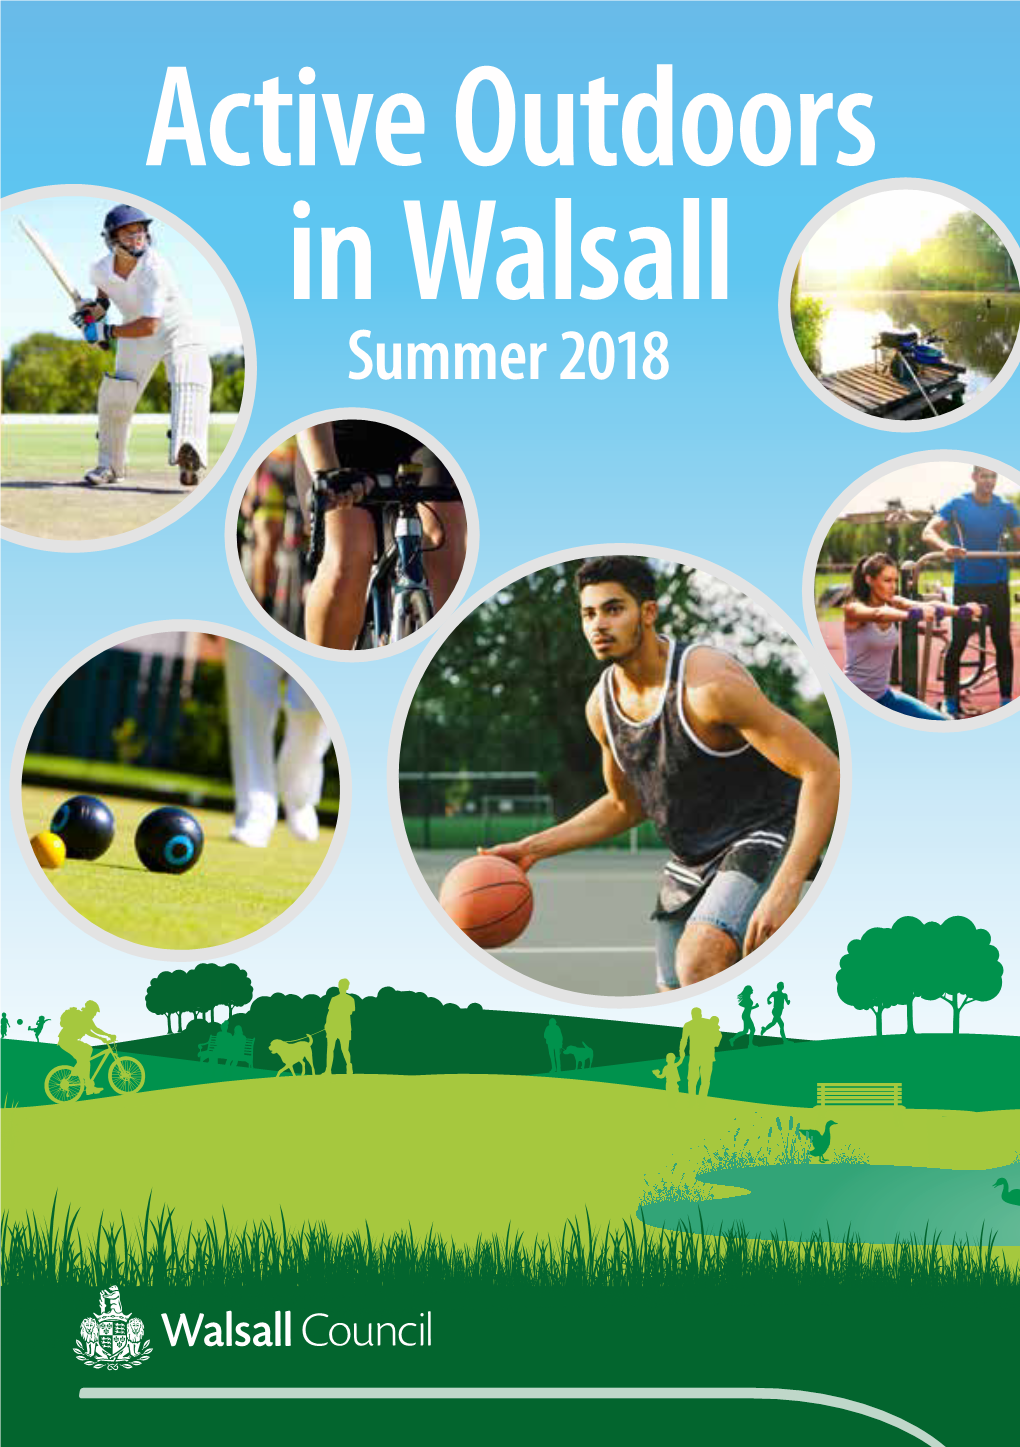 Active Outdoors in Walsall Summer 2018 Welcome to the New Active Outdoors in Walsall Booklet